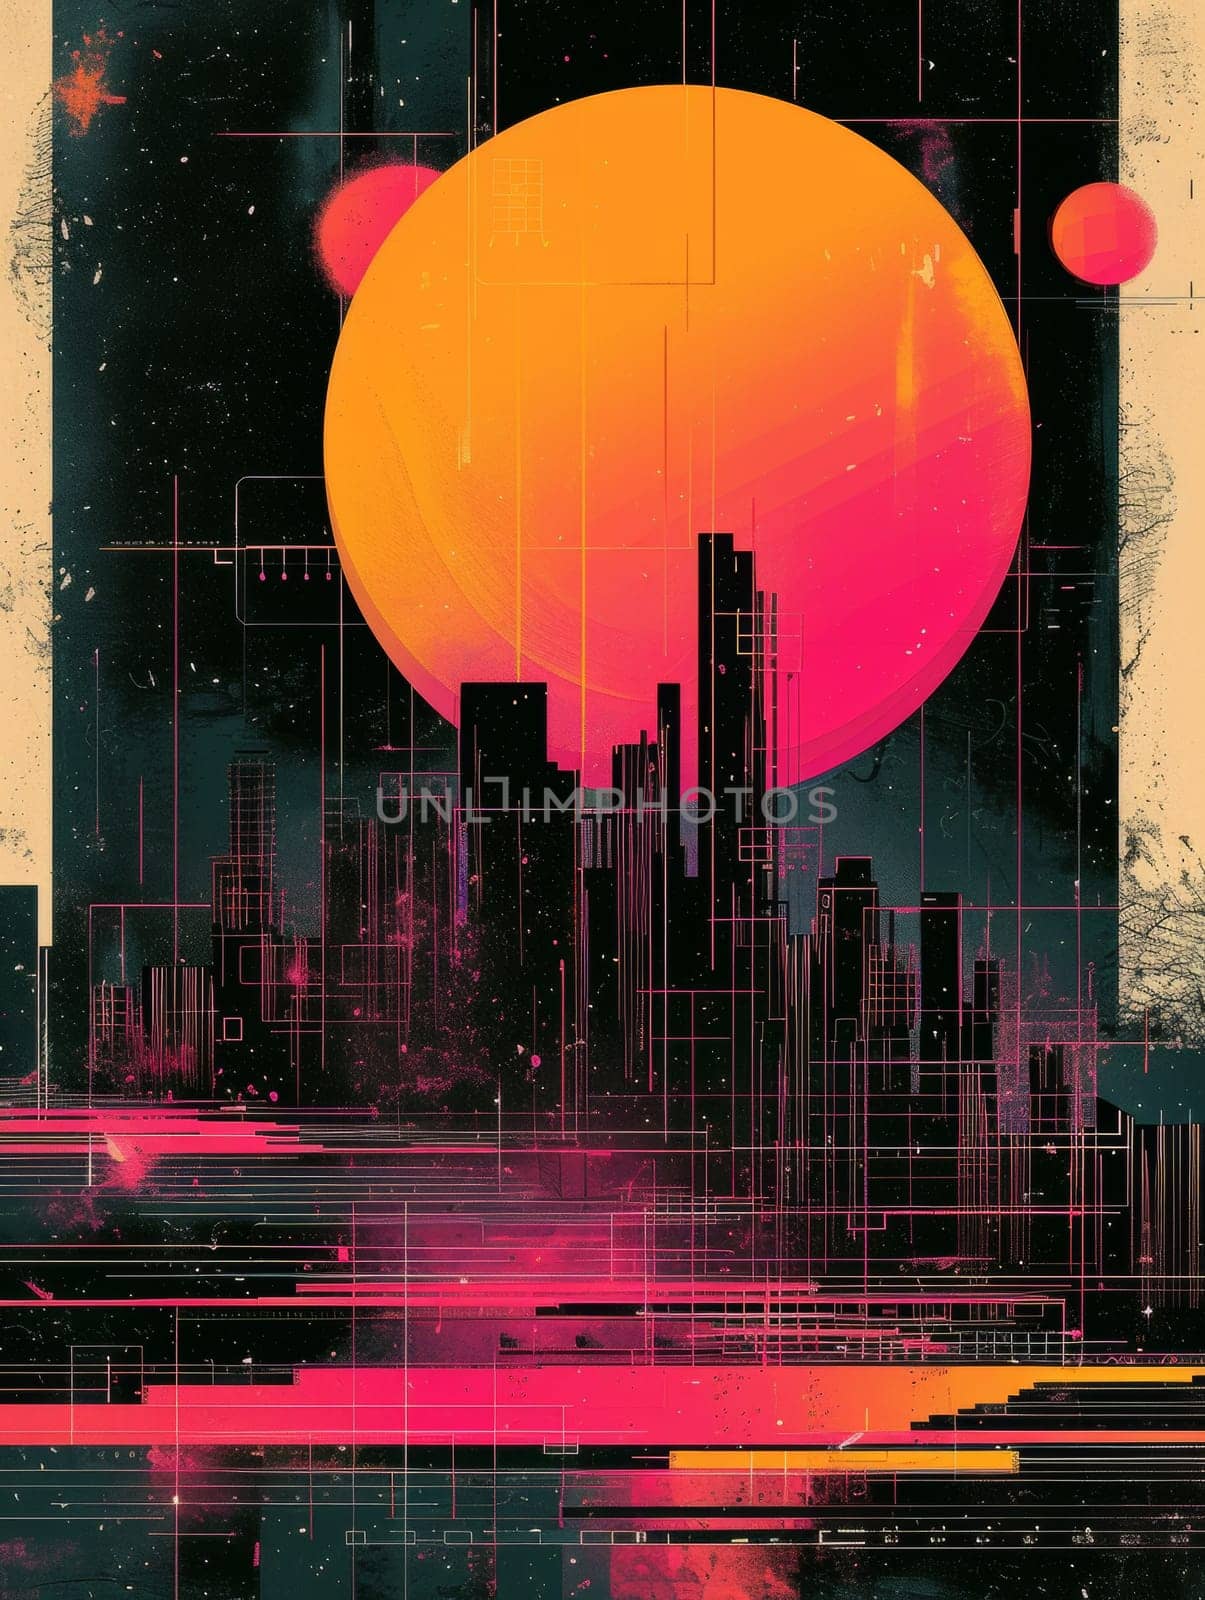 A cityscape with a large orange orb in the sky, AI by starush